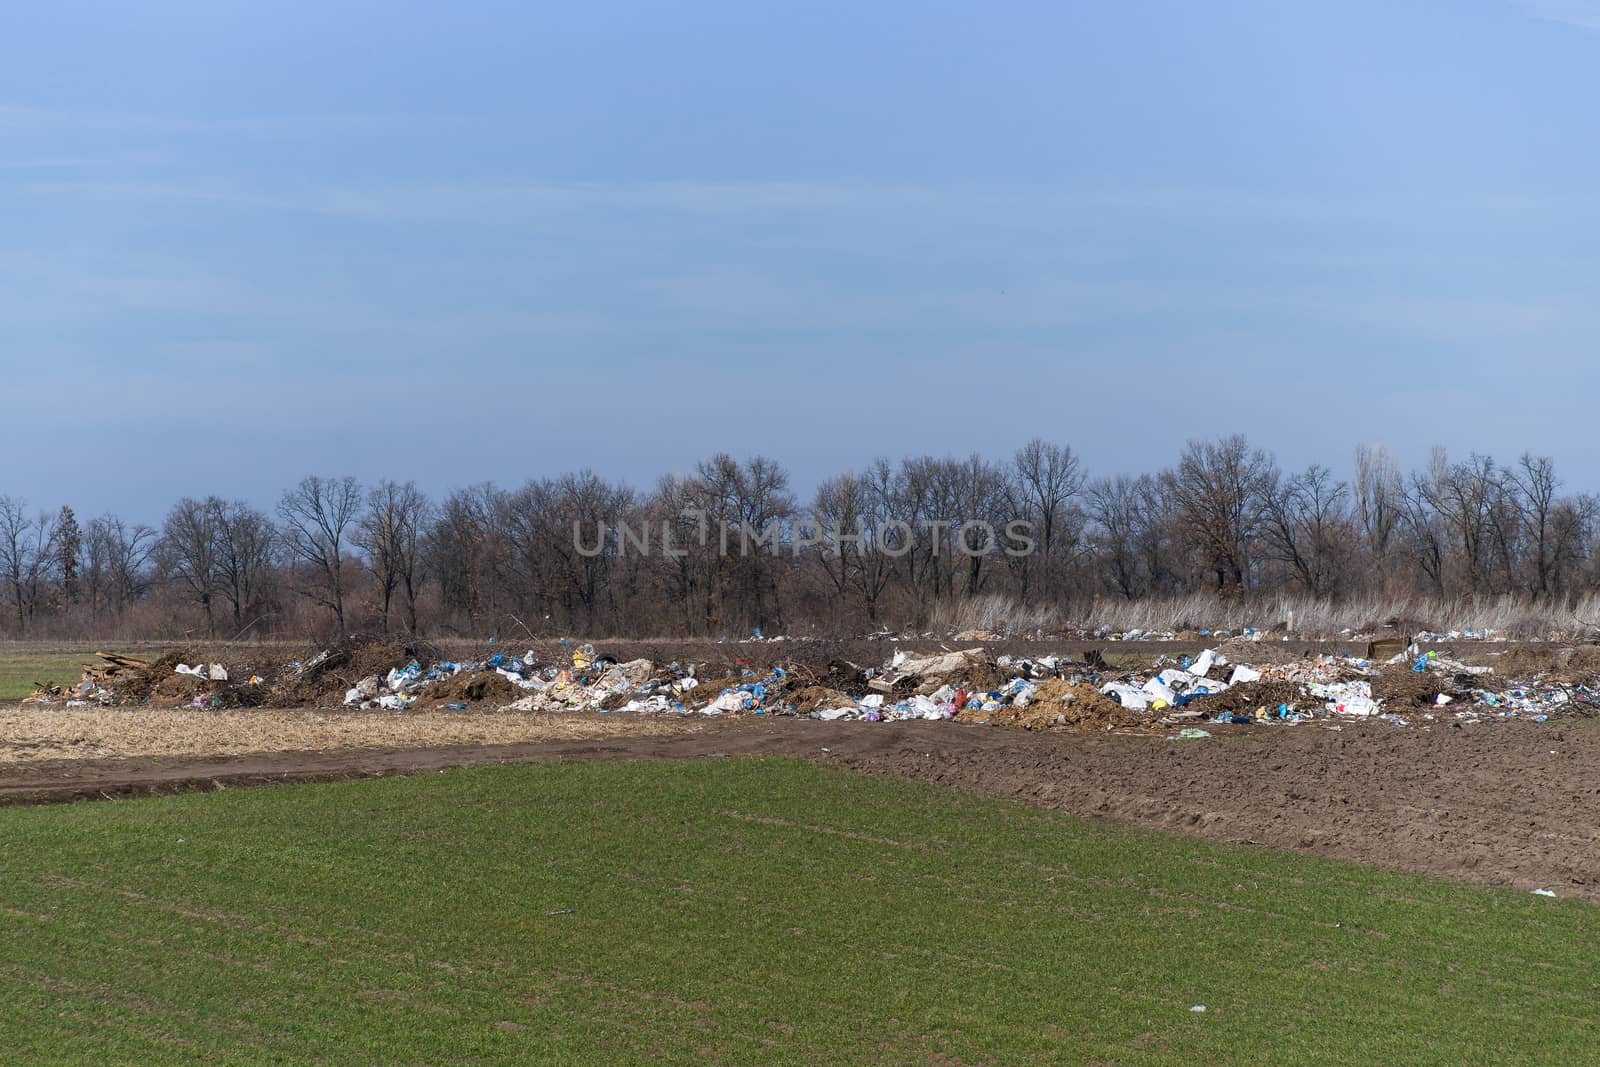 Trash on the agriculture field. Ecology problem and big harm to  by alexsdriver